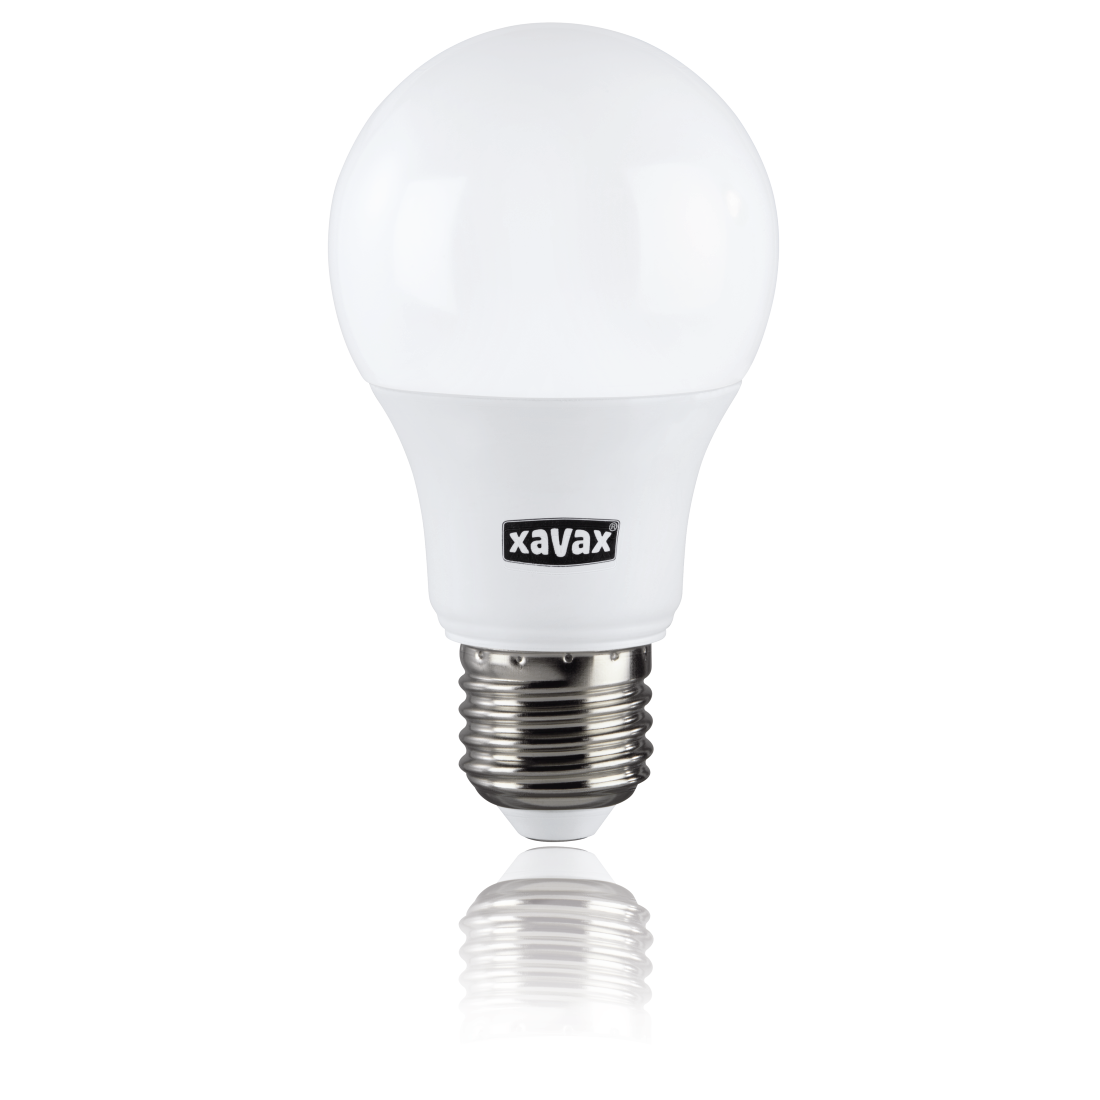 abx2 High-Res Image 2 - Xavax, LED Bulb, E27, 806lm replaces 60W, incandescent bulb, daylight